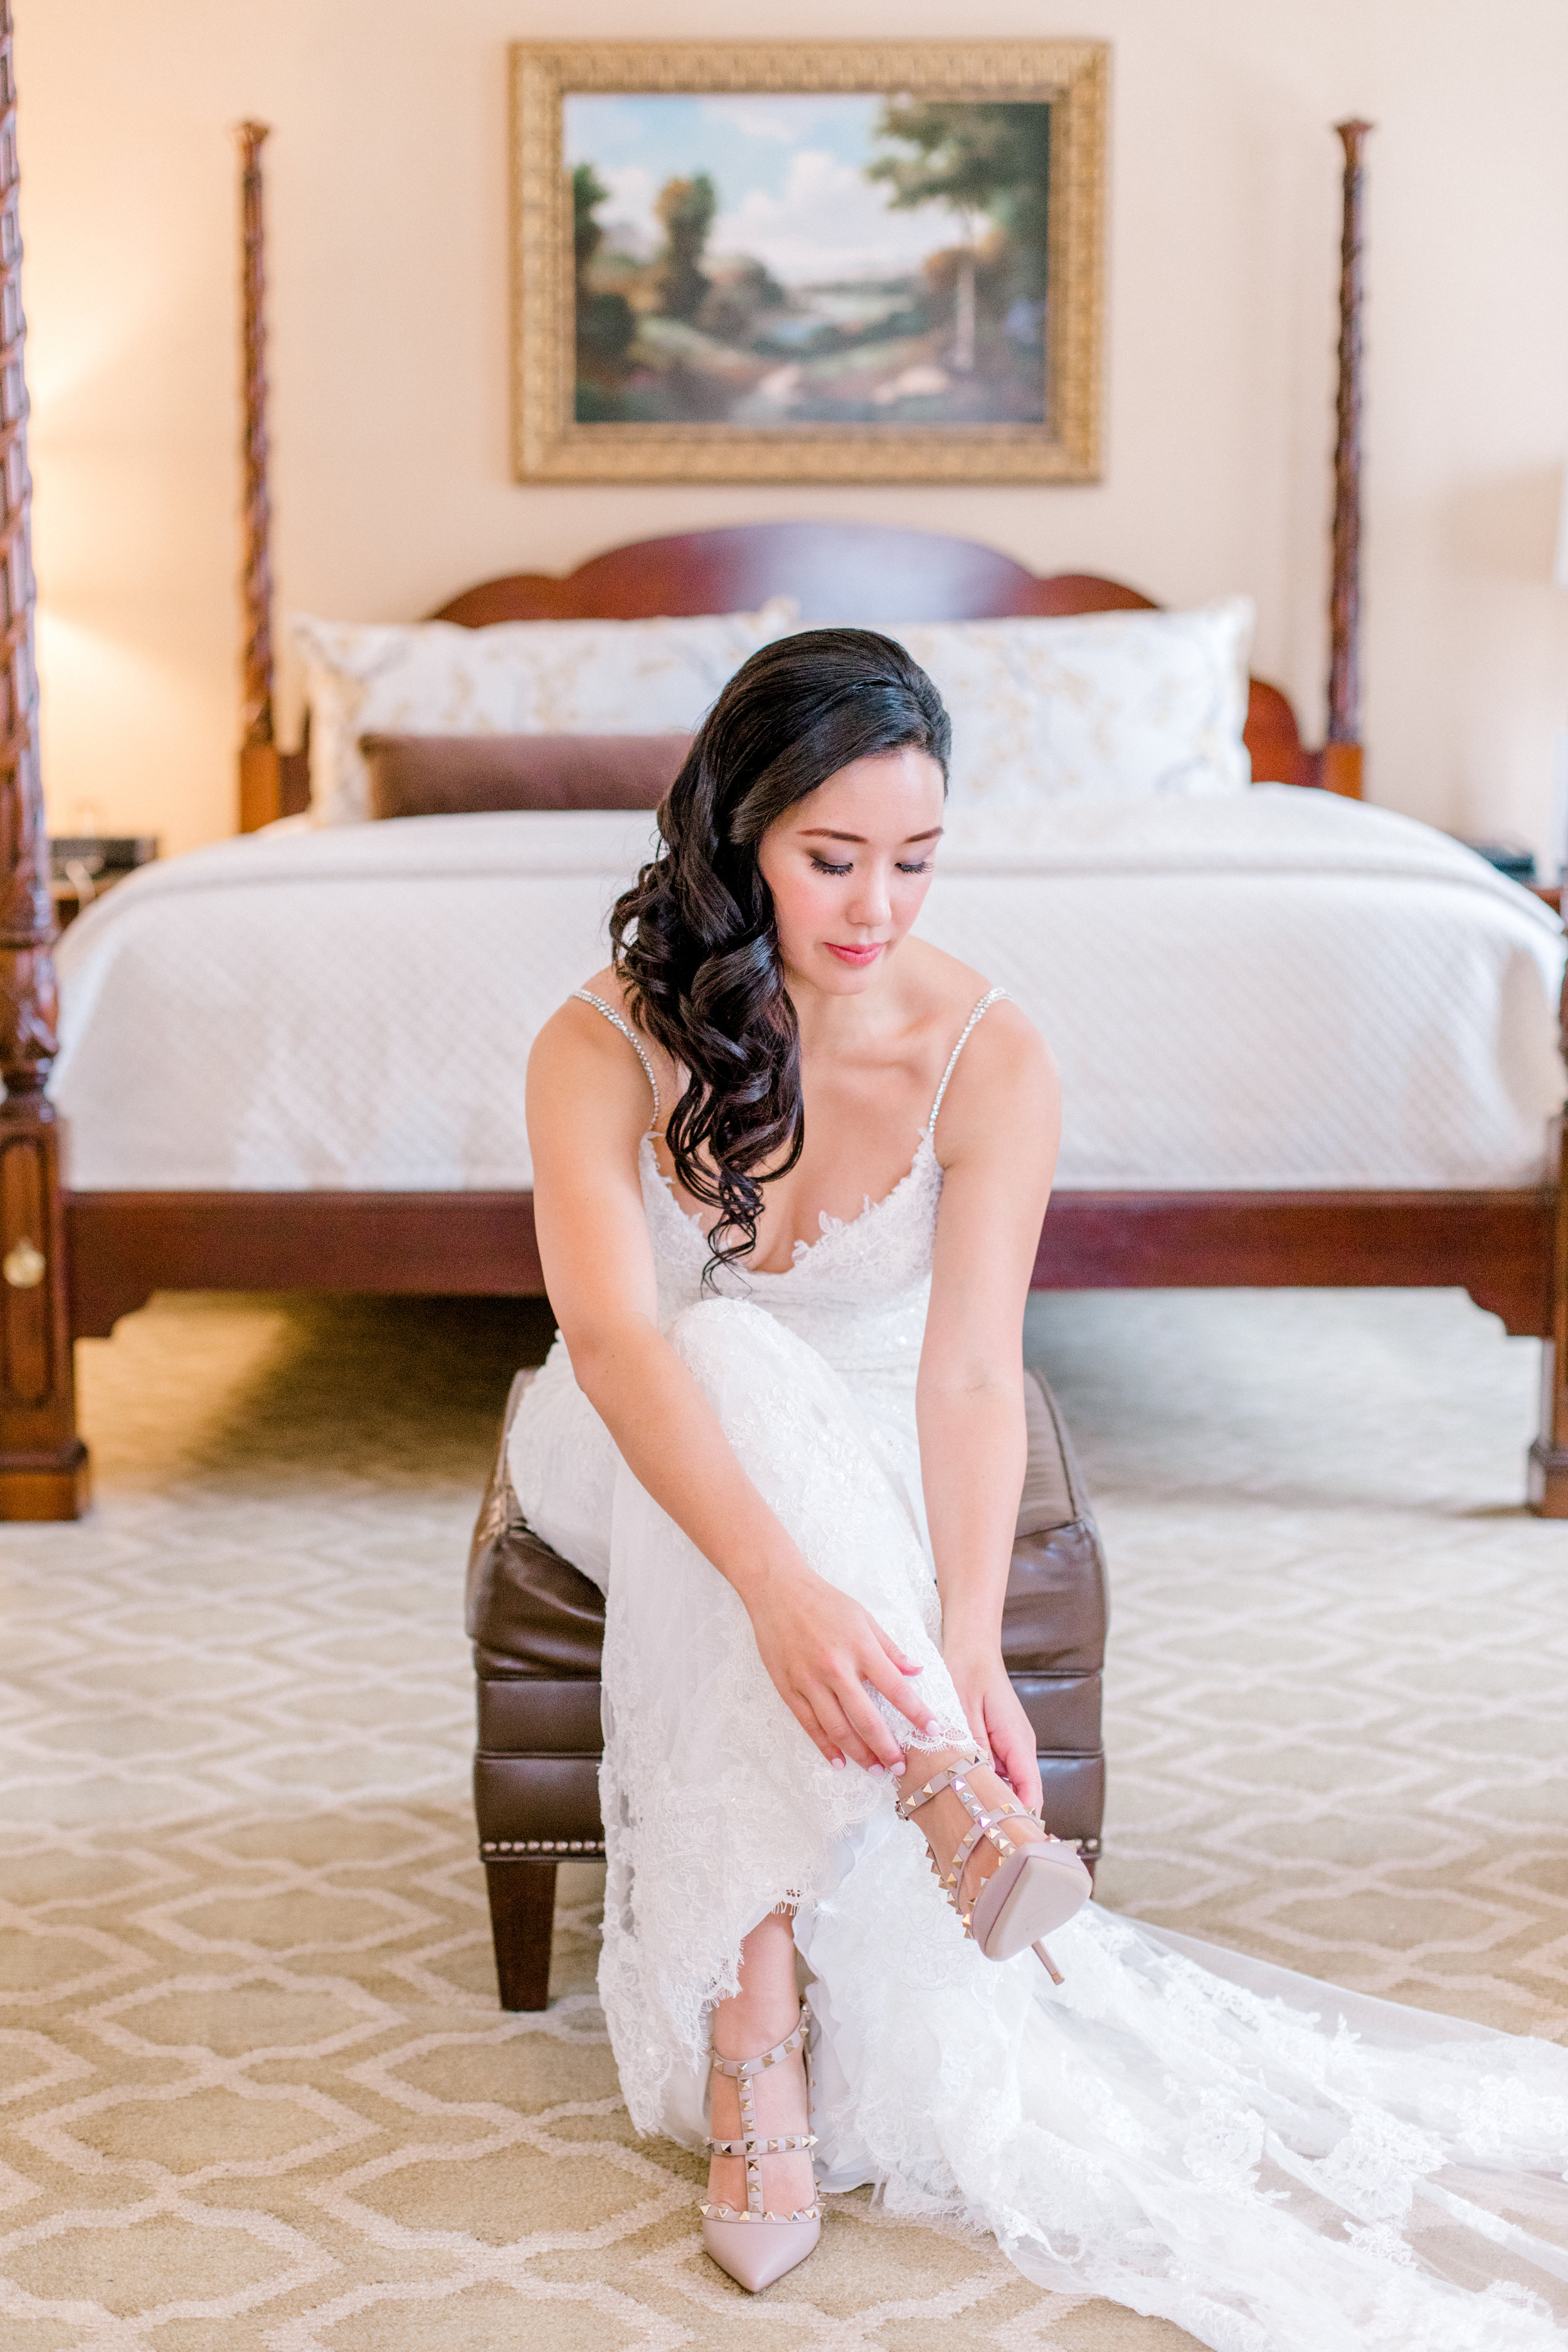 LaceyMichellePhotography_NK_2019_GettingReady-139.jpg